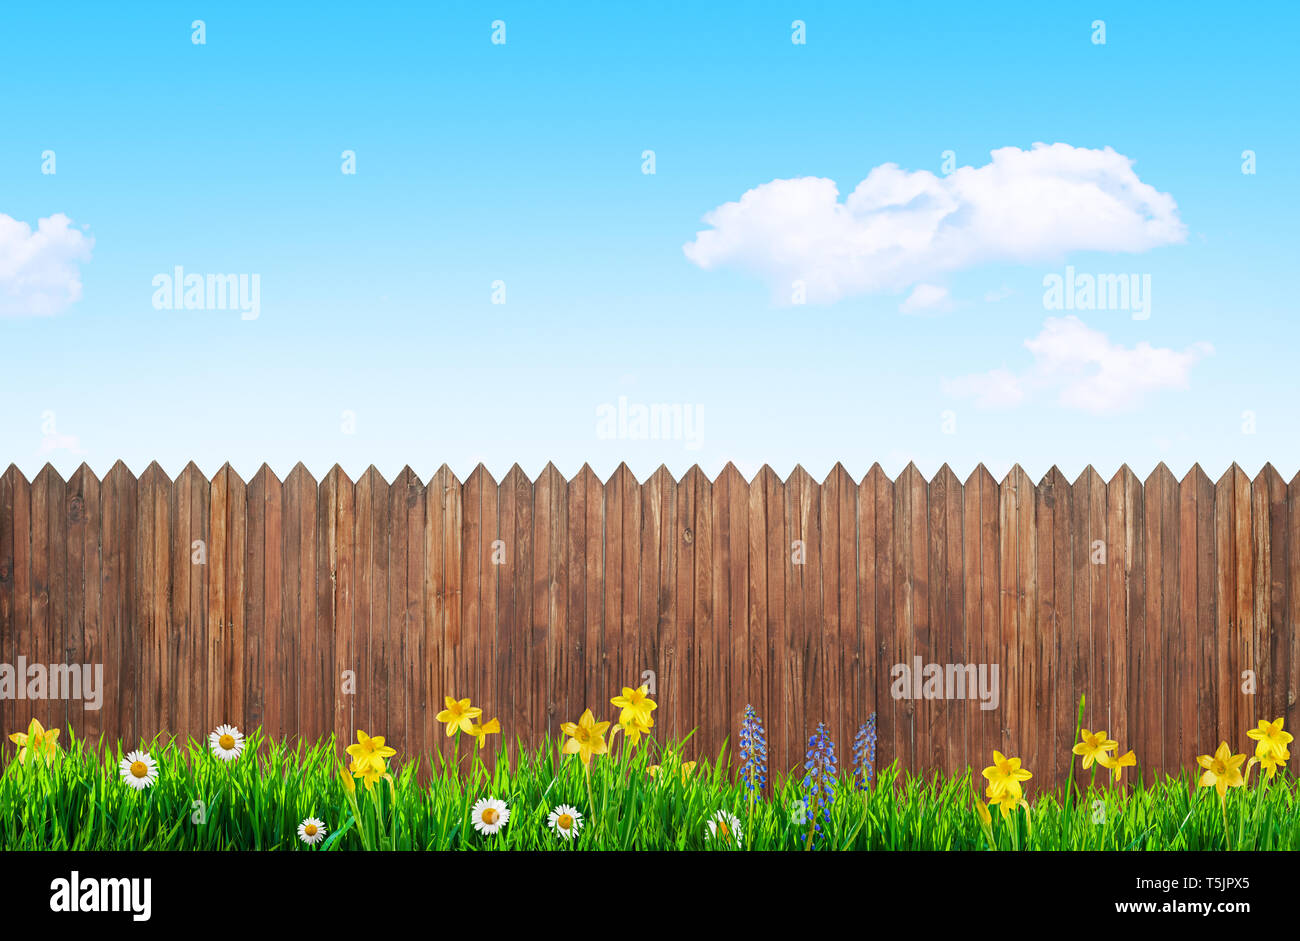 spring flowers and wooden garden fence background Stock Photo